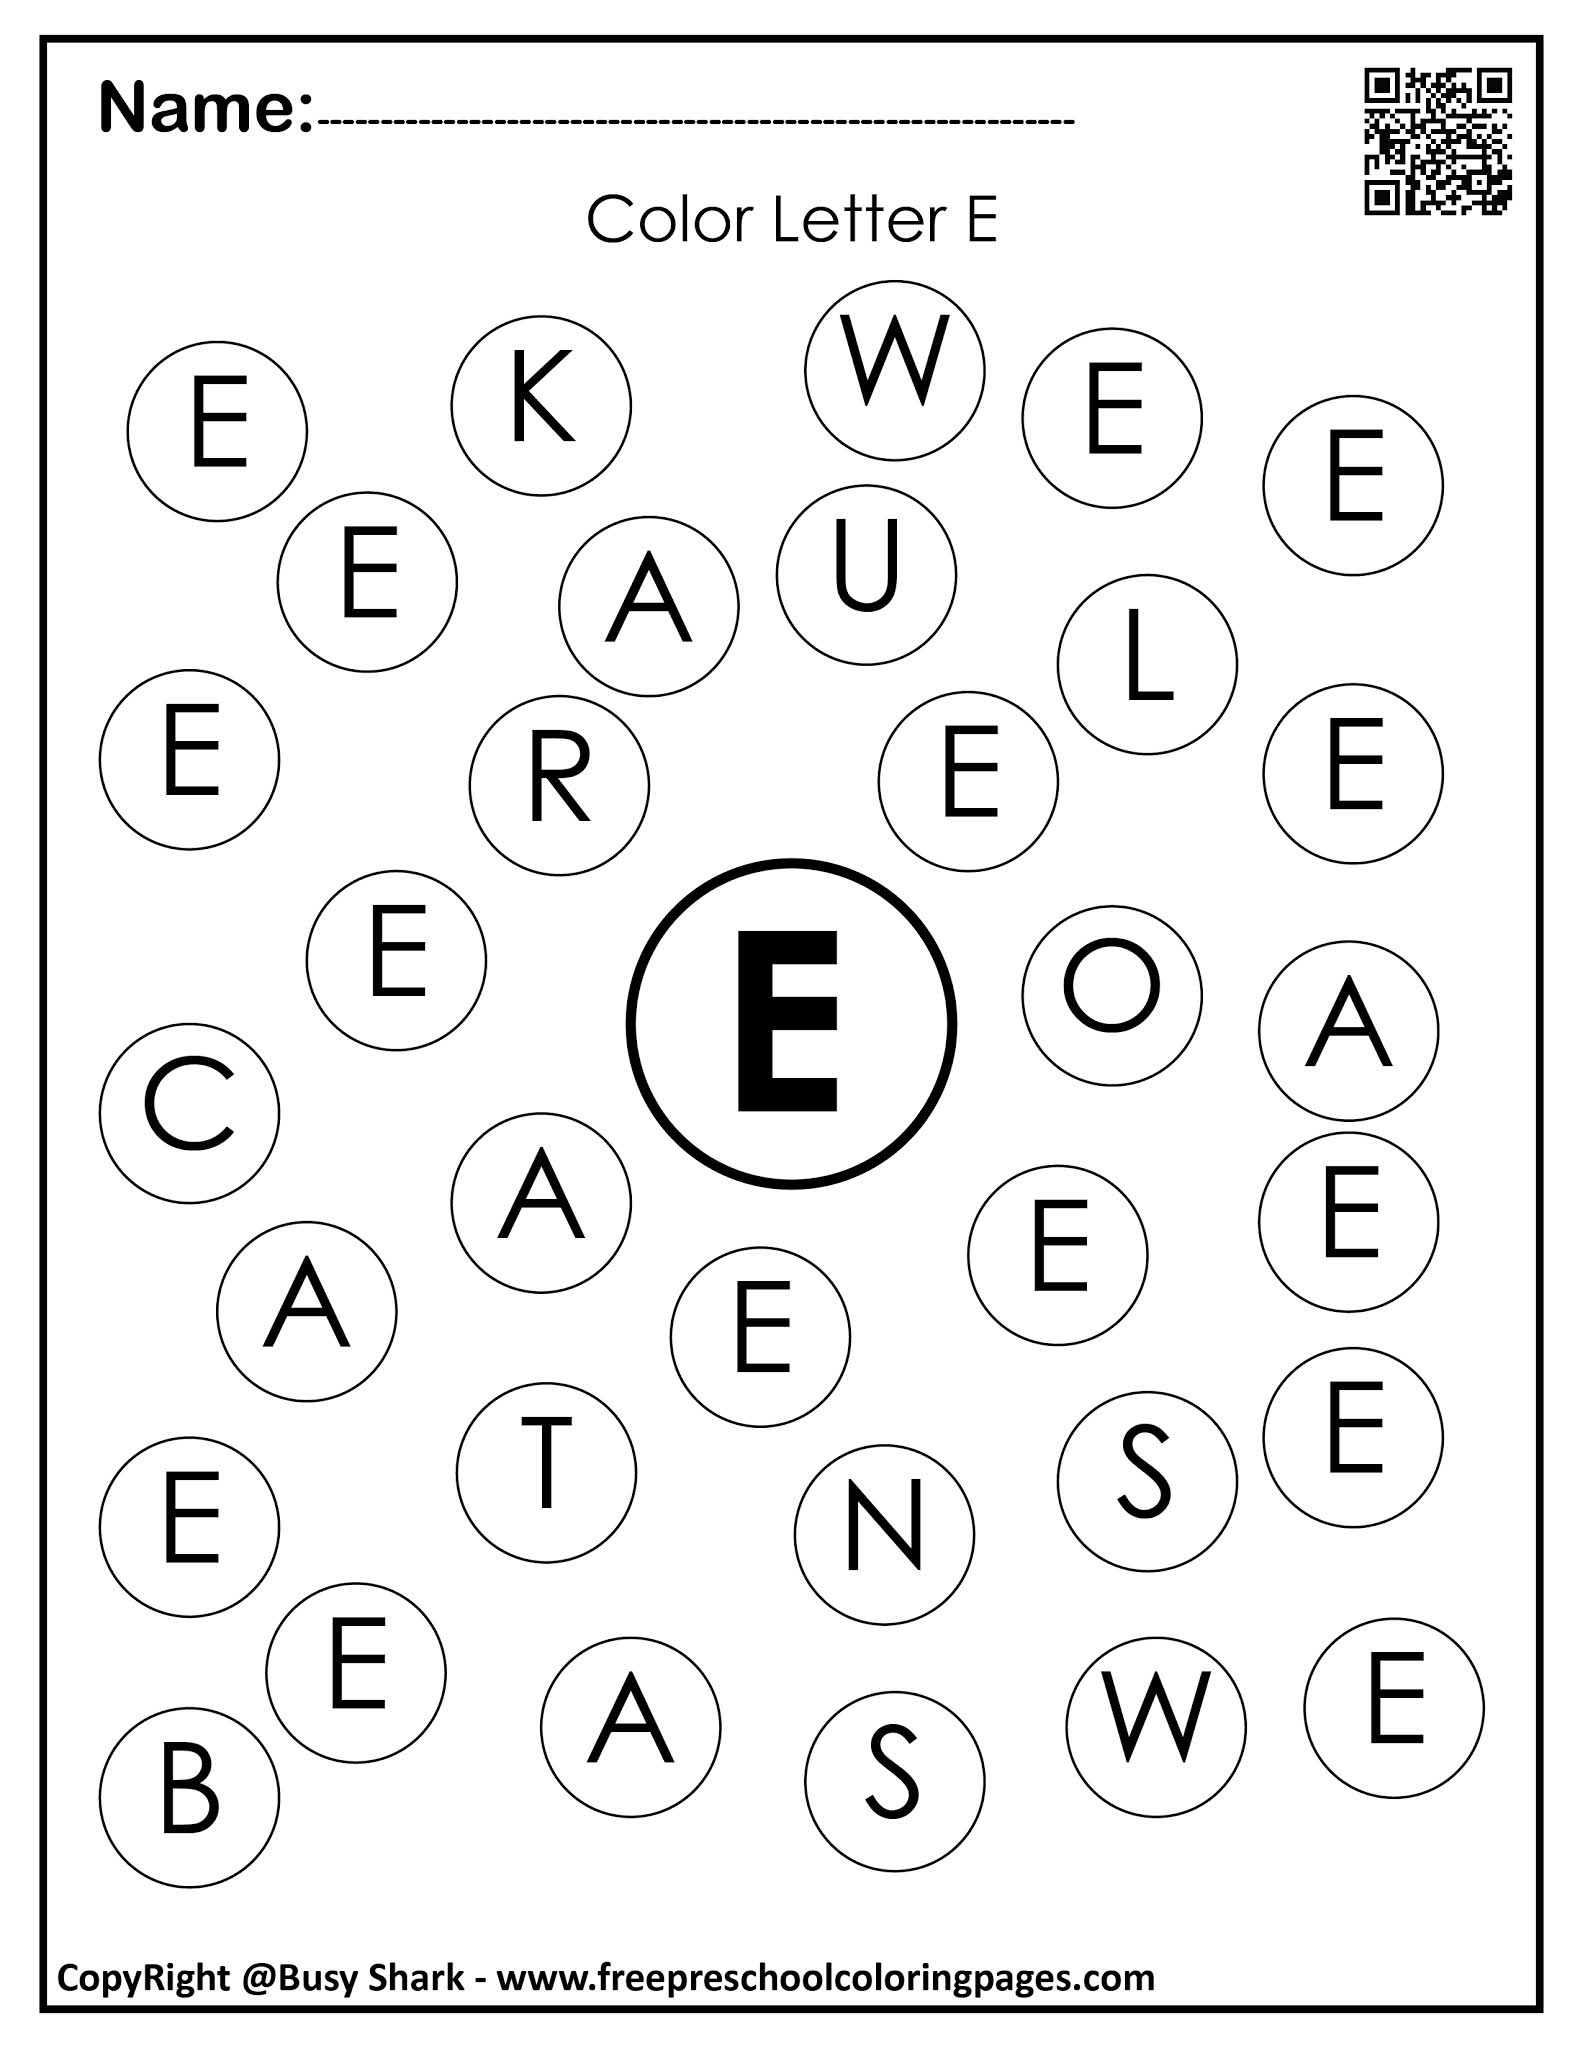 Alphabet Lore E free coloring page - Busy Shark